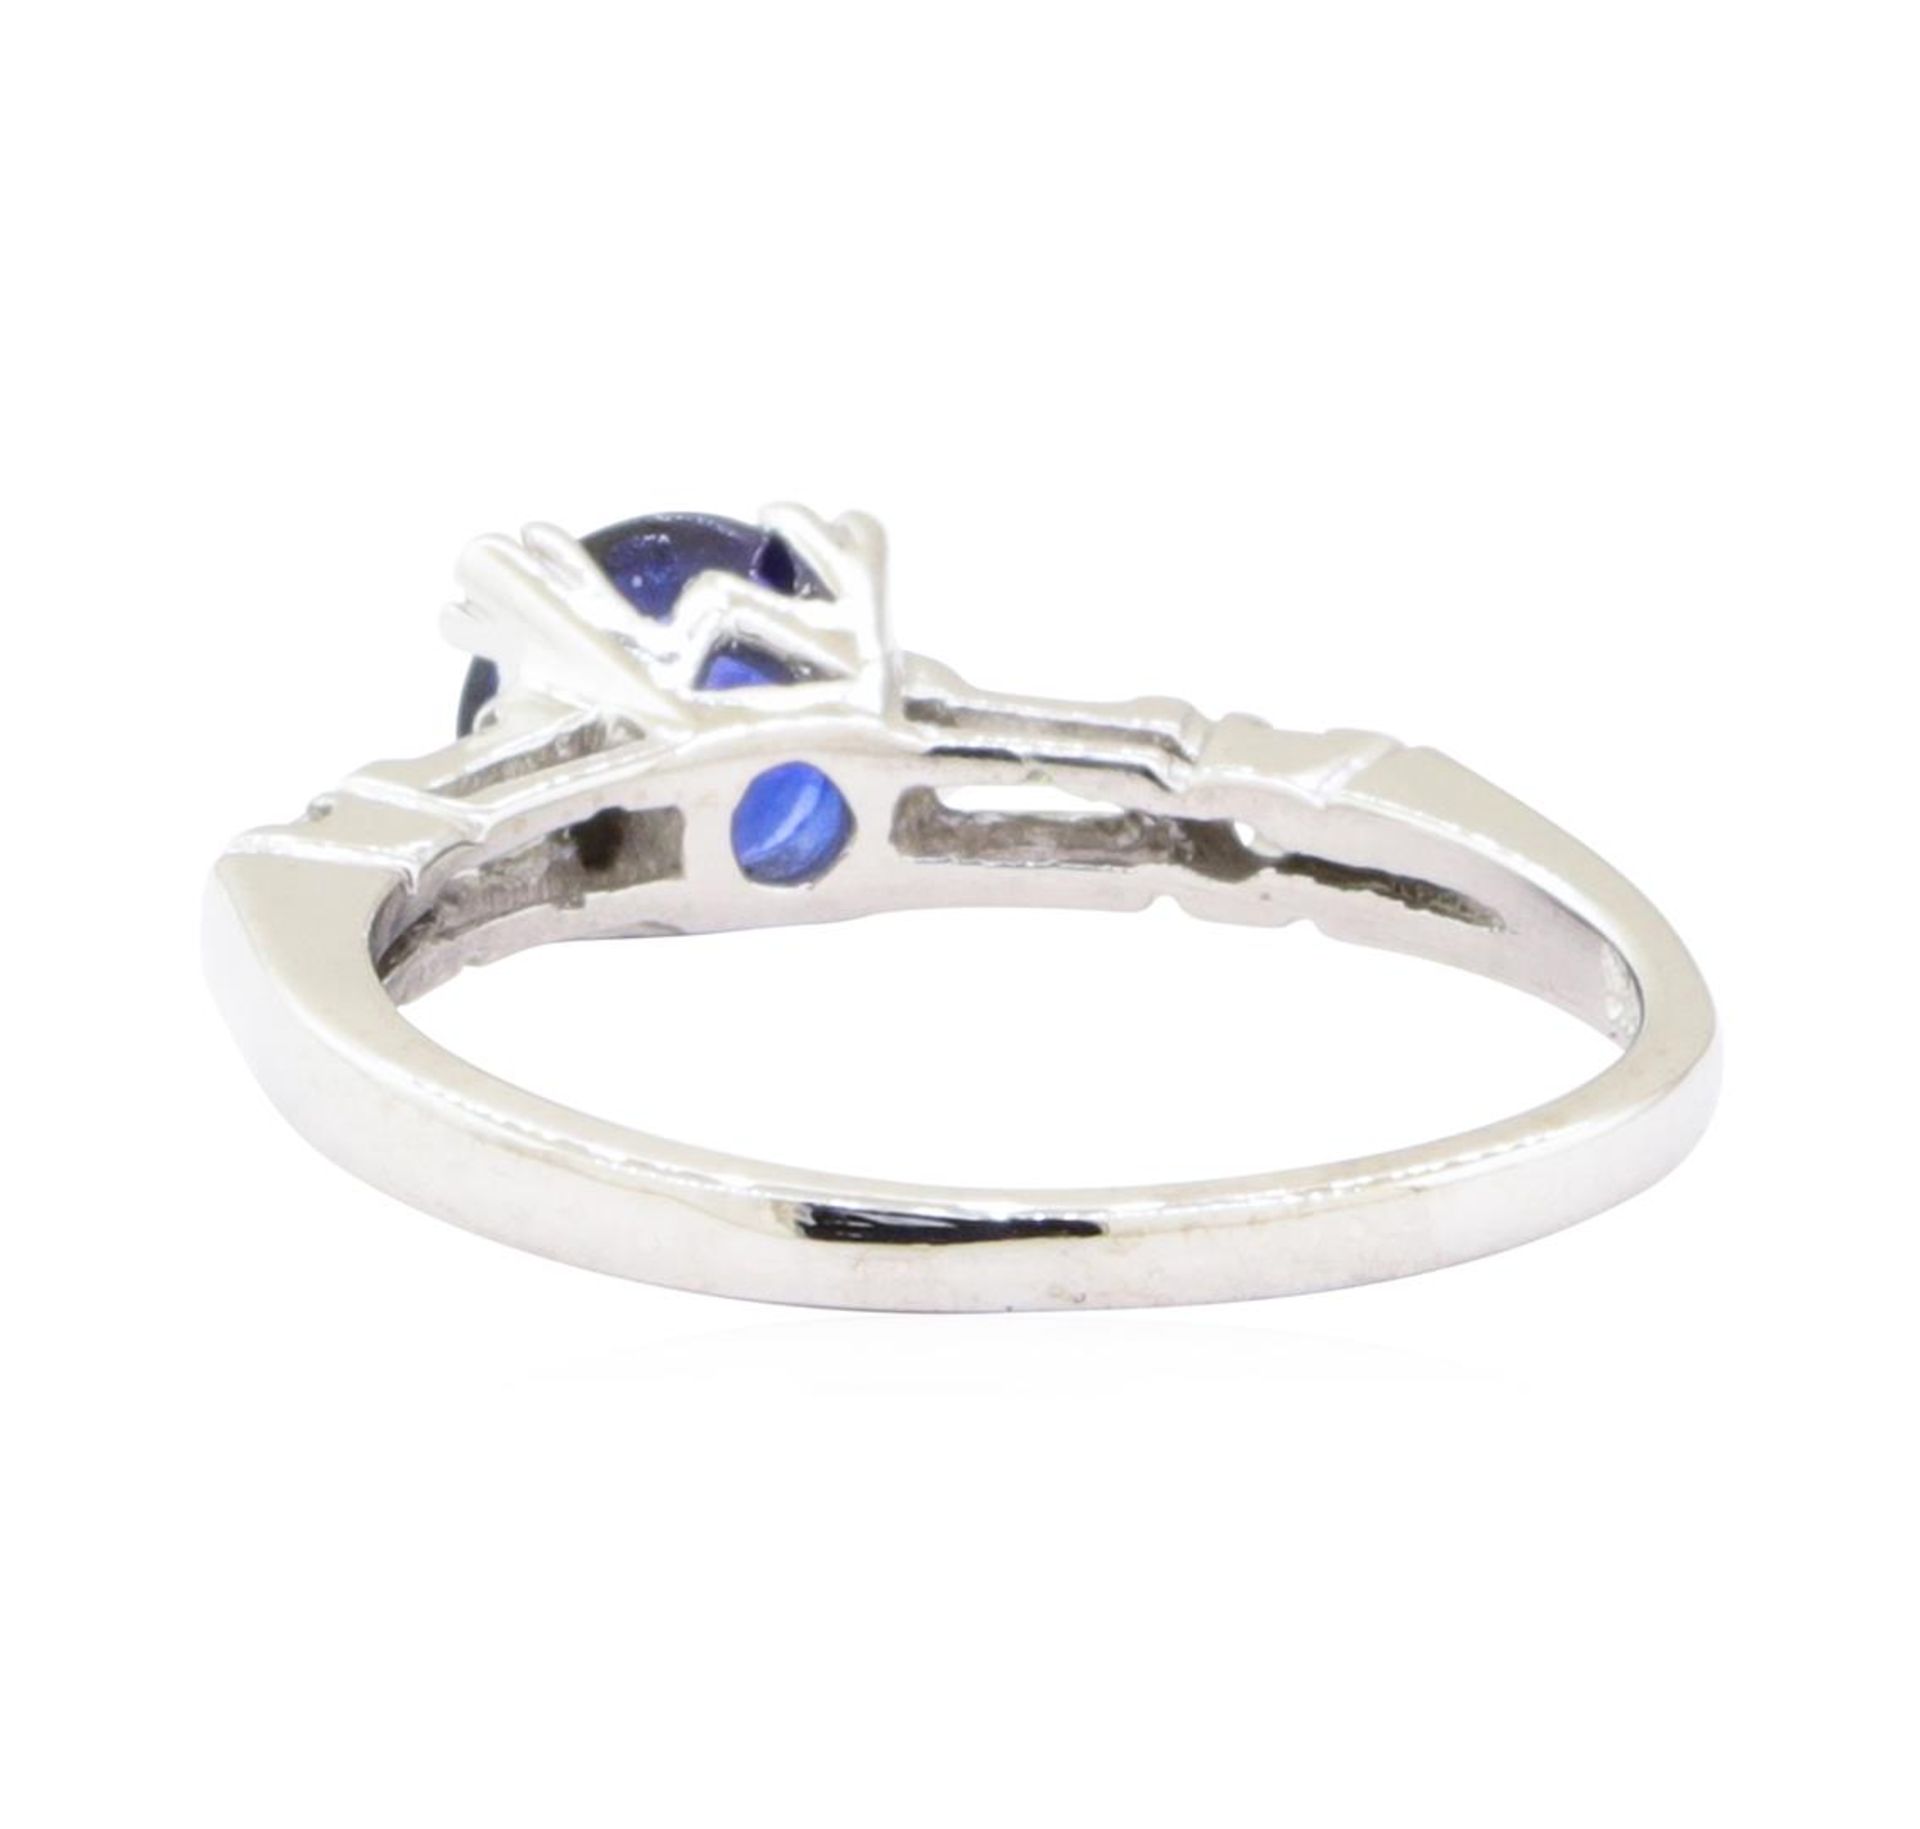 1.20 ctw Sapphire and Diamond Ring - 18KT White Gold - Image 3 of 4